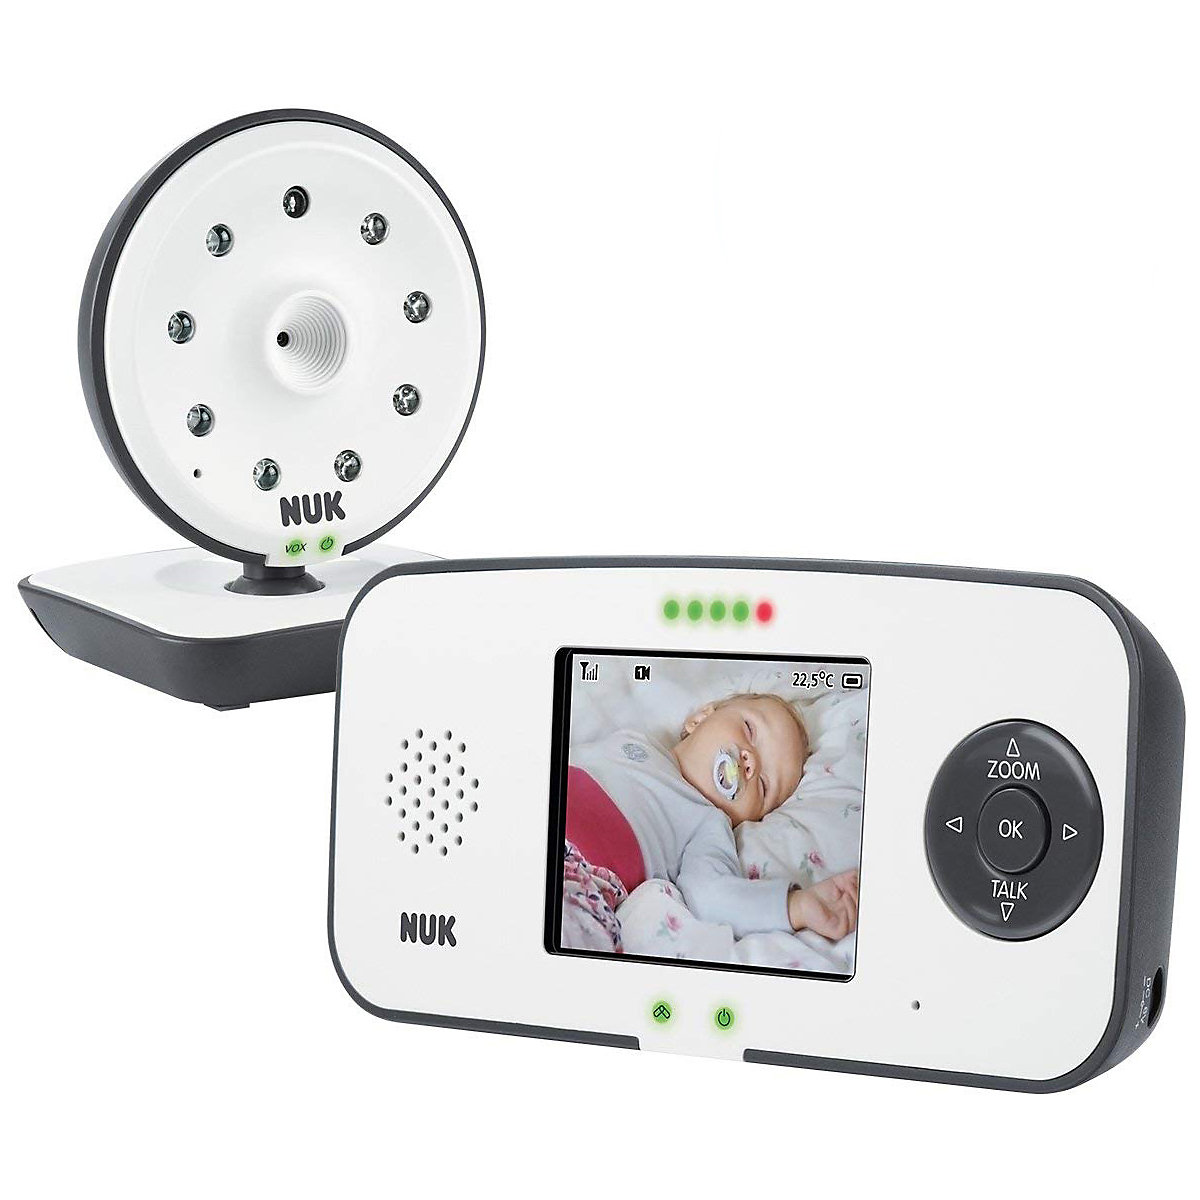 NUK Eco Control Video Display 550VD digitales Babyphone mit Eco-Mode Video Funktion und Full-Eco-Control